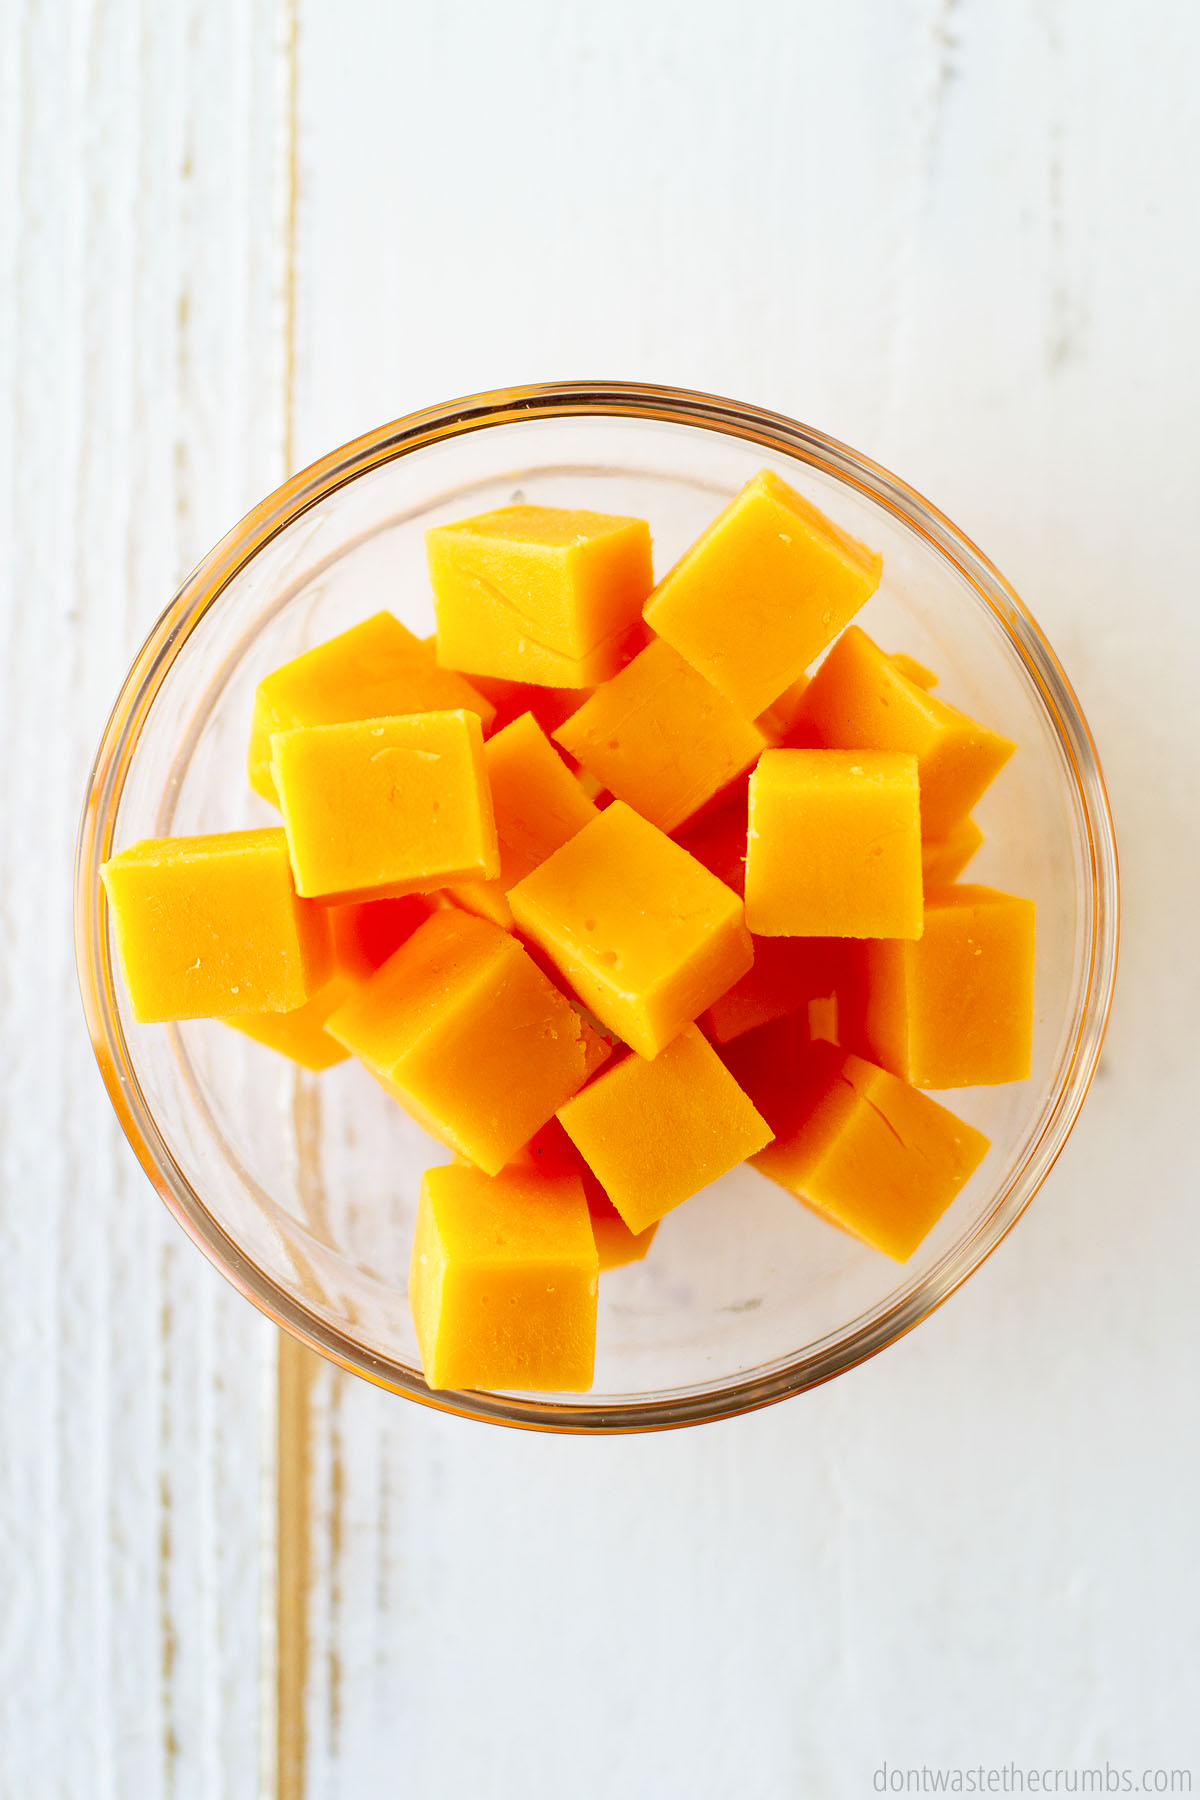 Cubes of cheddar cheese in a clear bowl.